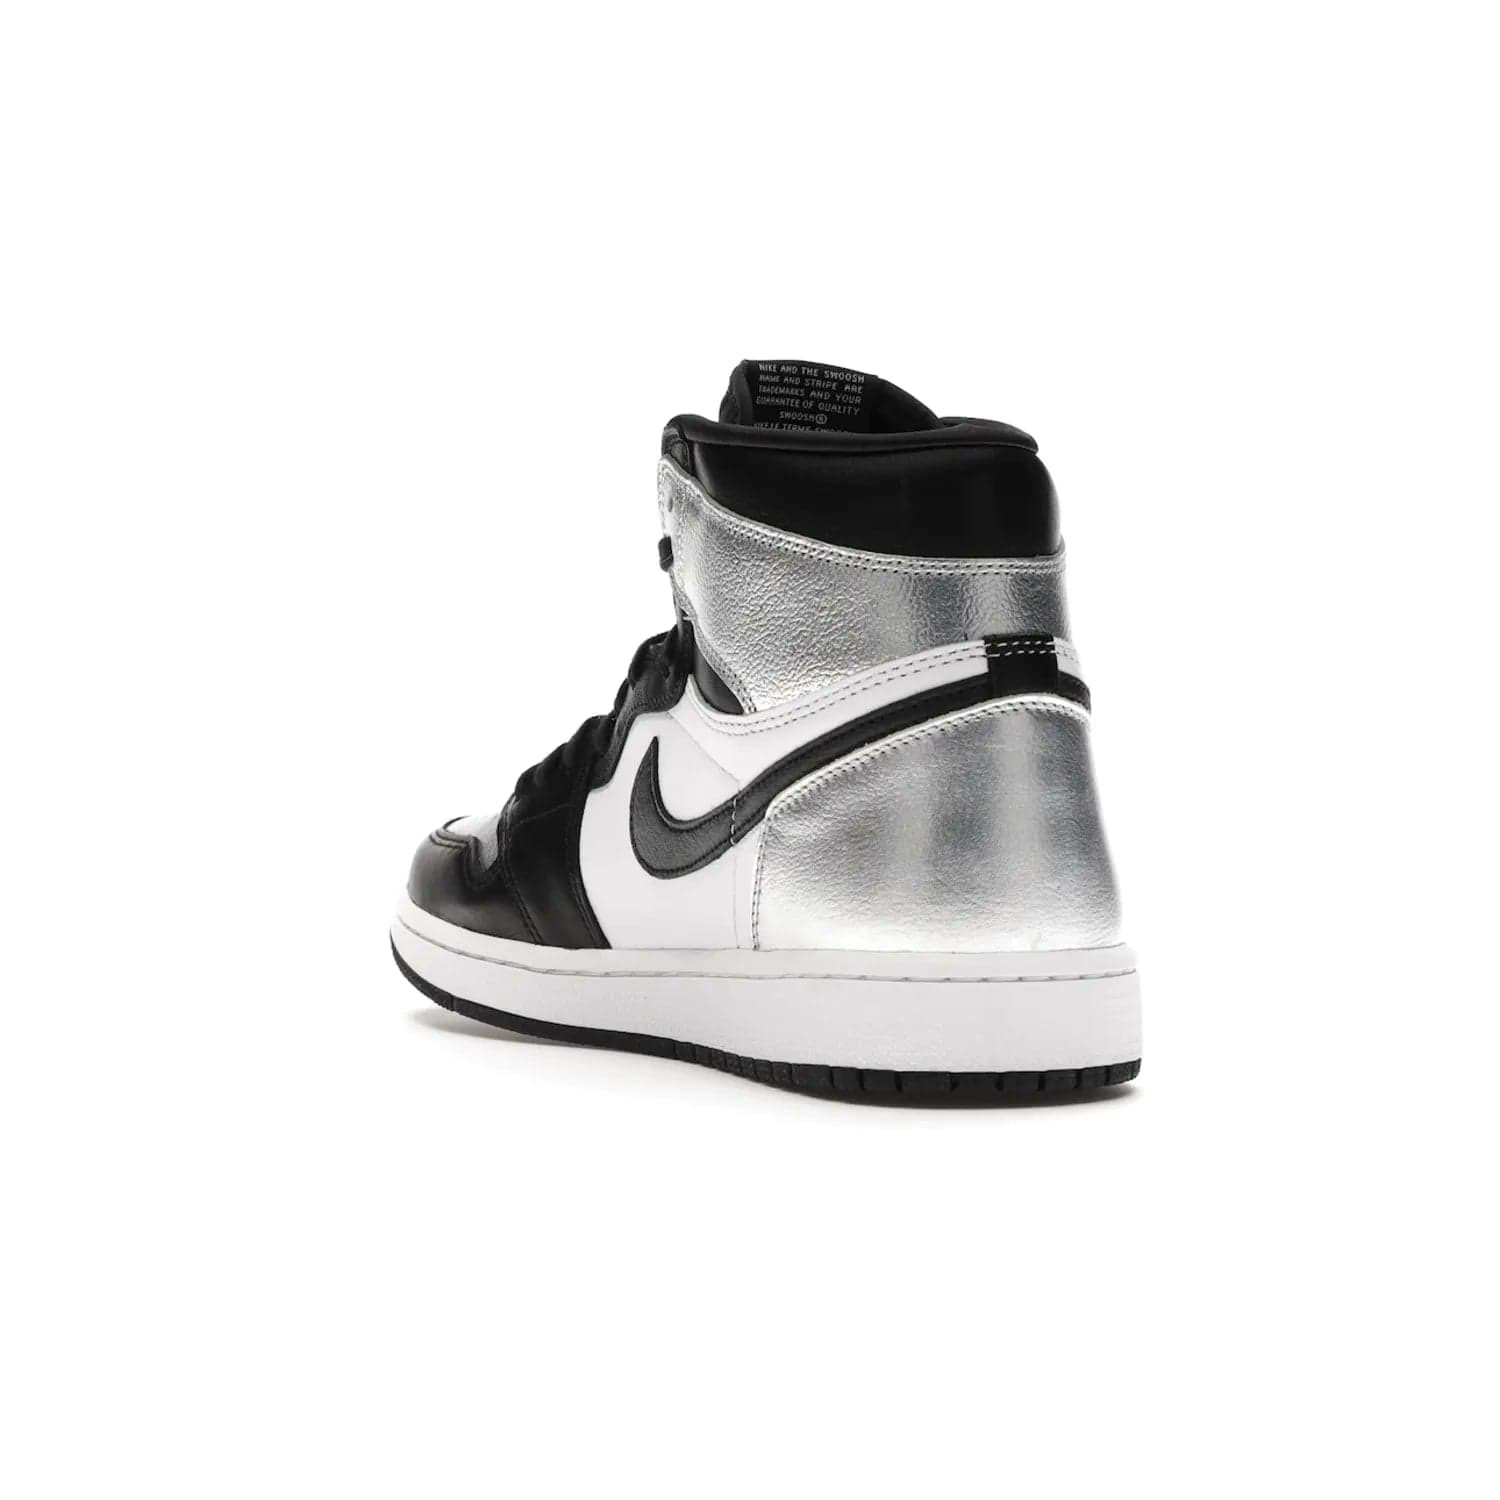 Jordan 1 Retro High Silver Toe (Women's) - Image 25 - Only at www.BallersClubKickz.com - Introducing the Jordan 1 Retro High Silver Toe (Women's): an updated spin on the iconic 'Black Toe' theme. Featuring white & black leather and silver patent leather construction. Nike Air branding, Air Jordan Wings logo, and white/black sole finish give a classic look. The perfect addition to an on-trend streetwear look. Available in classic black & white, this Jordan 1 is an instant classic. Released in February 20